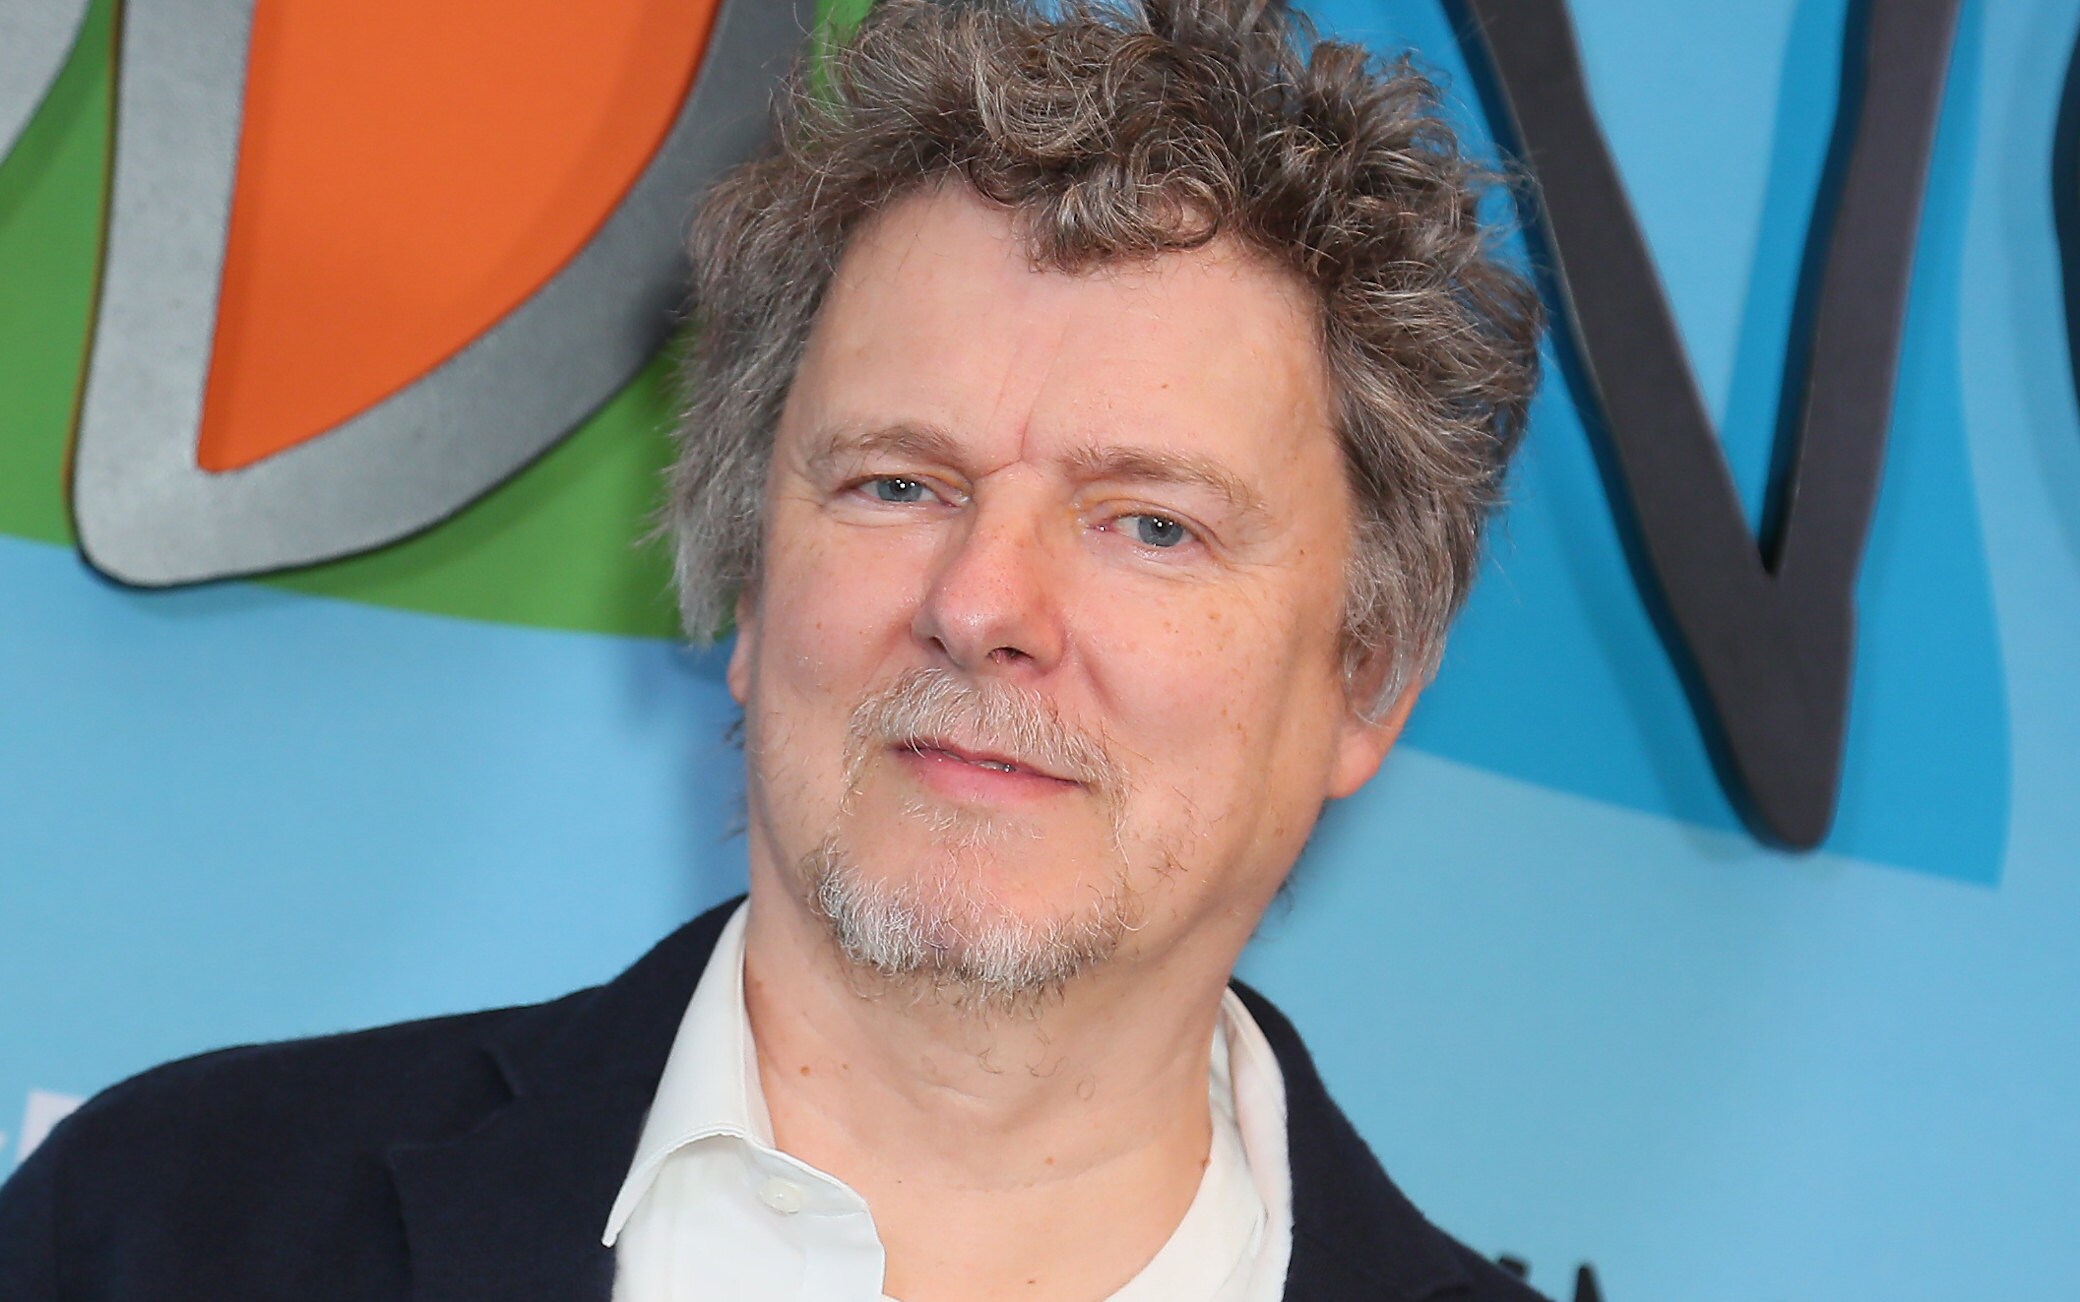 Michel Gondry will be honored at the Rome Film Festival